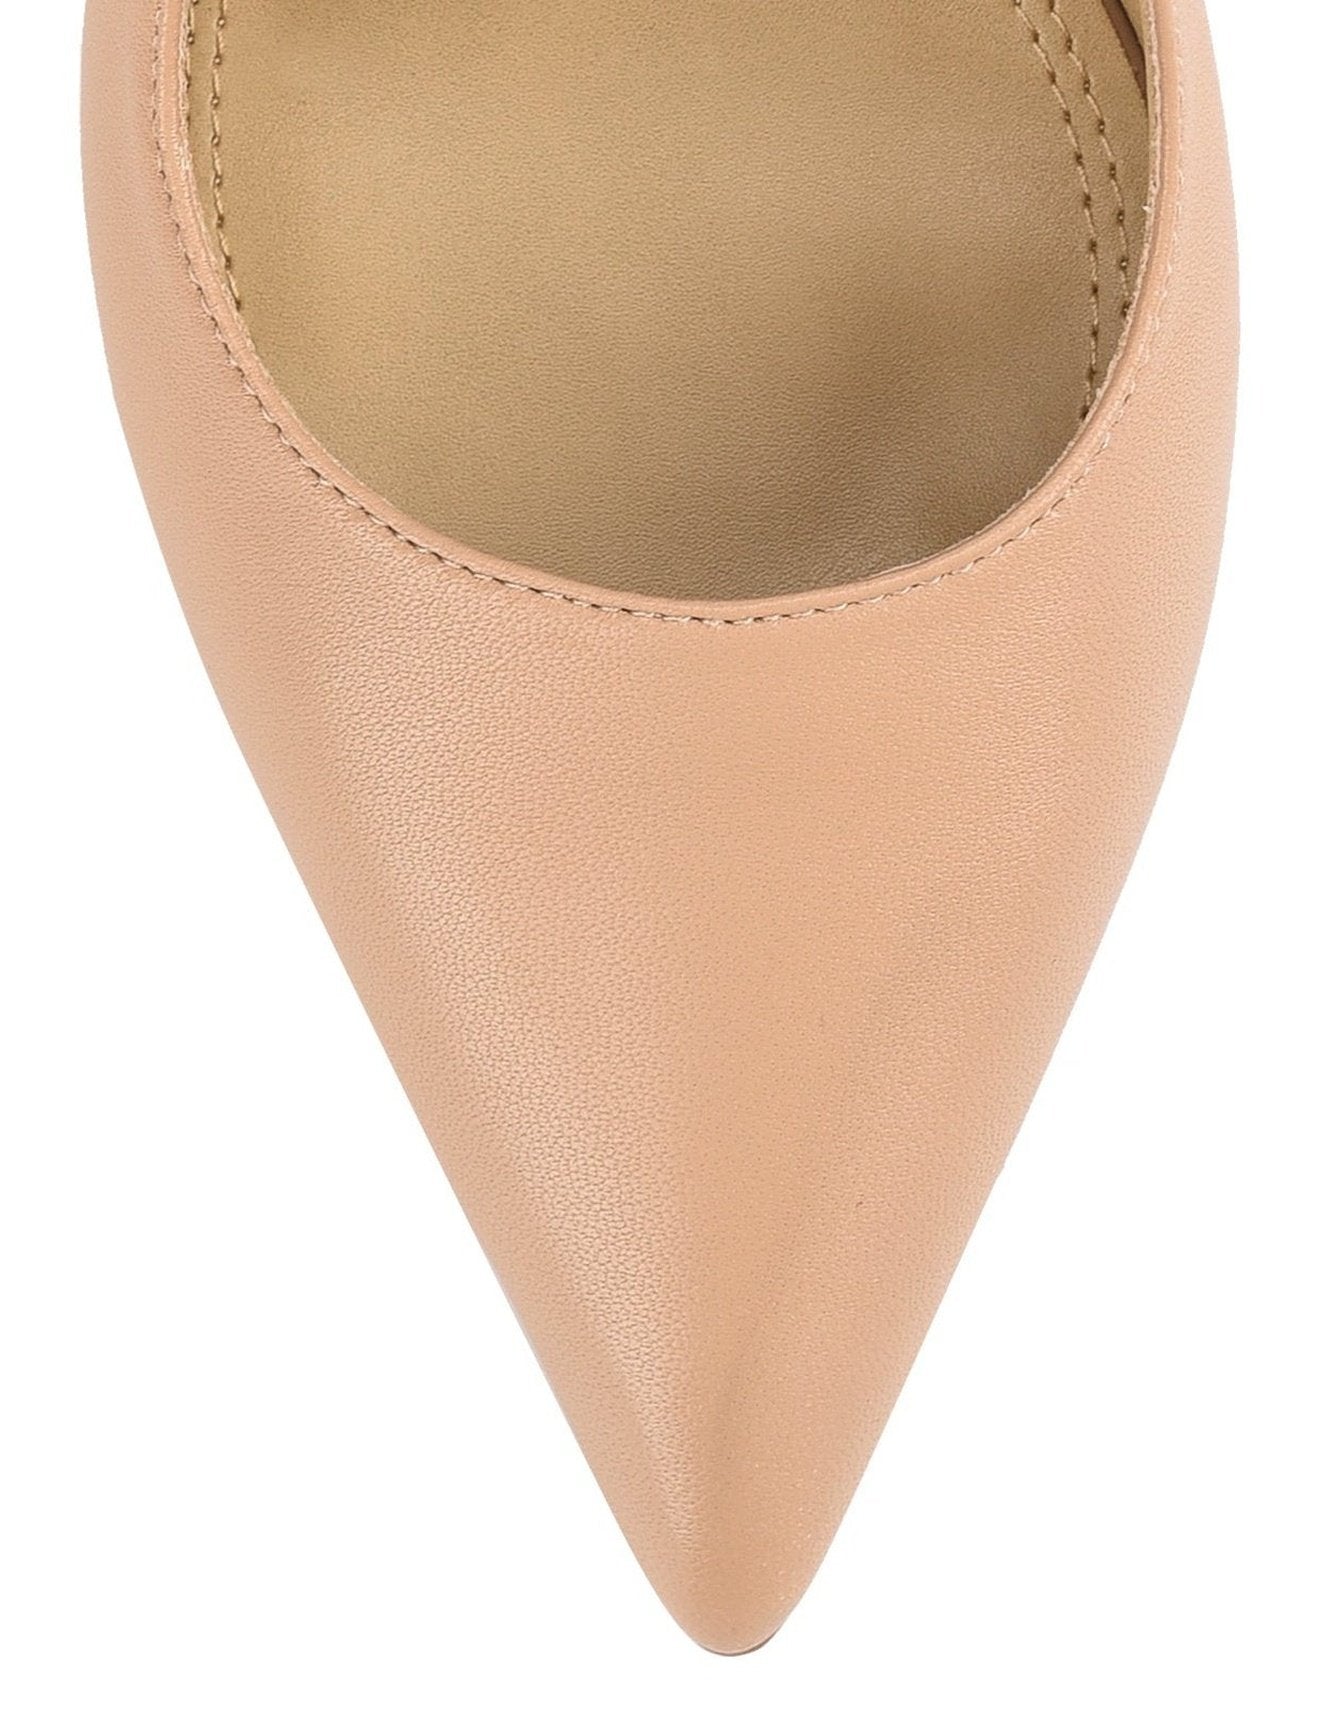 Women's stiletto high heel slingback with pointed toe in almond leather